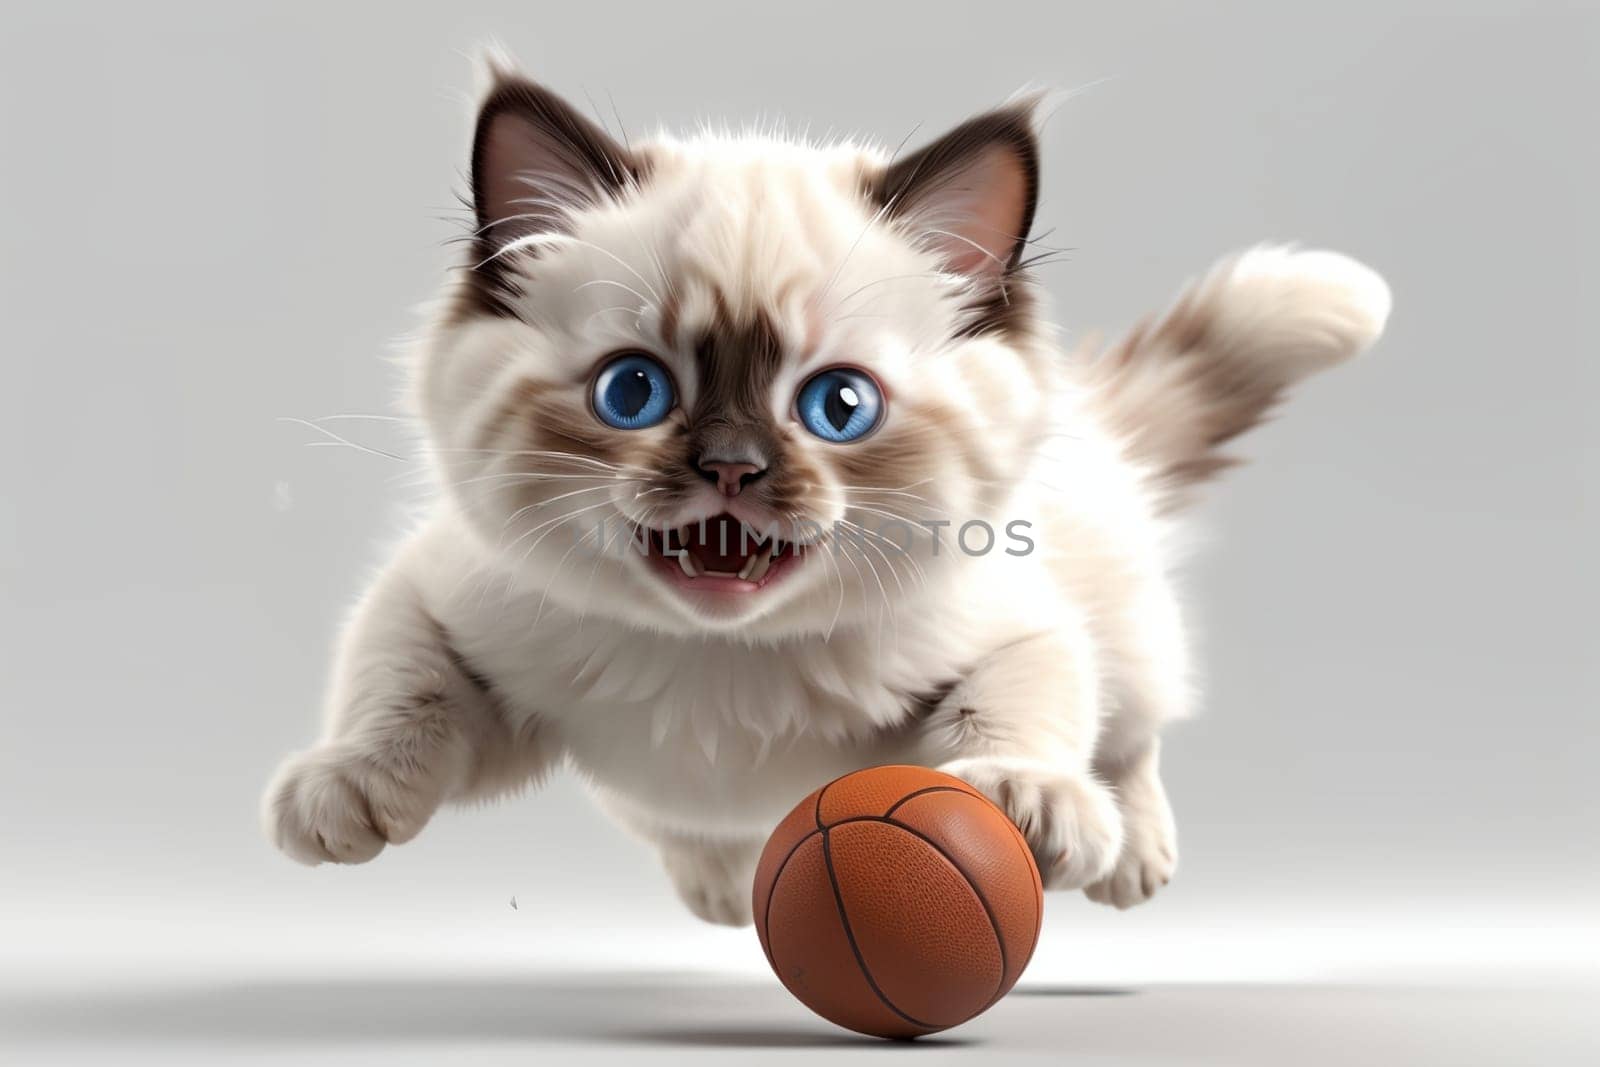 cute kitten playing with a ball, isolated on a white background .